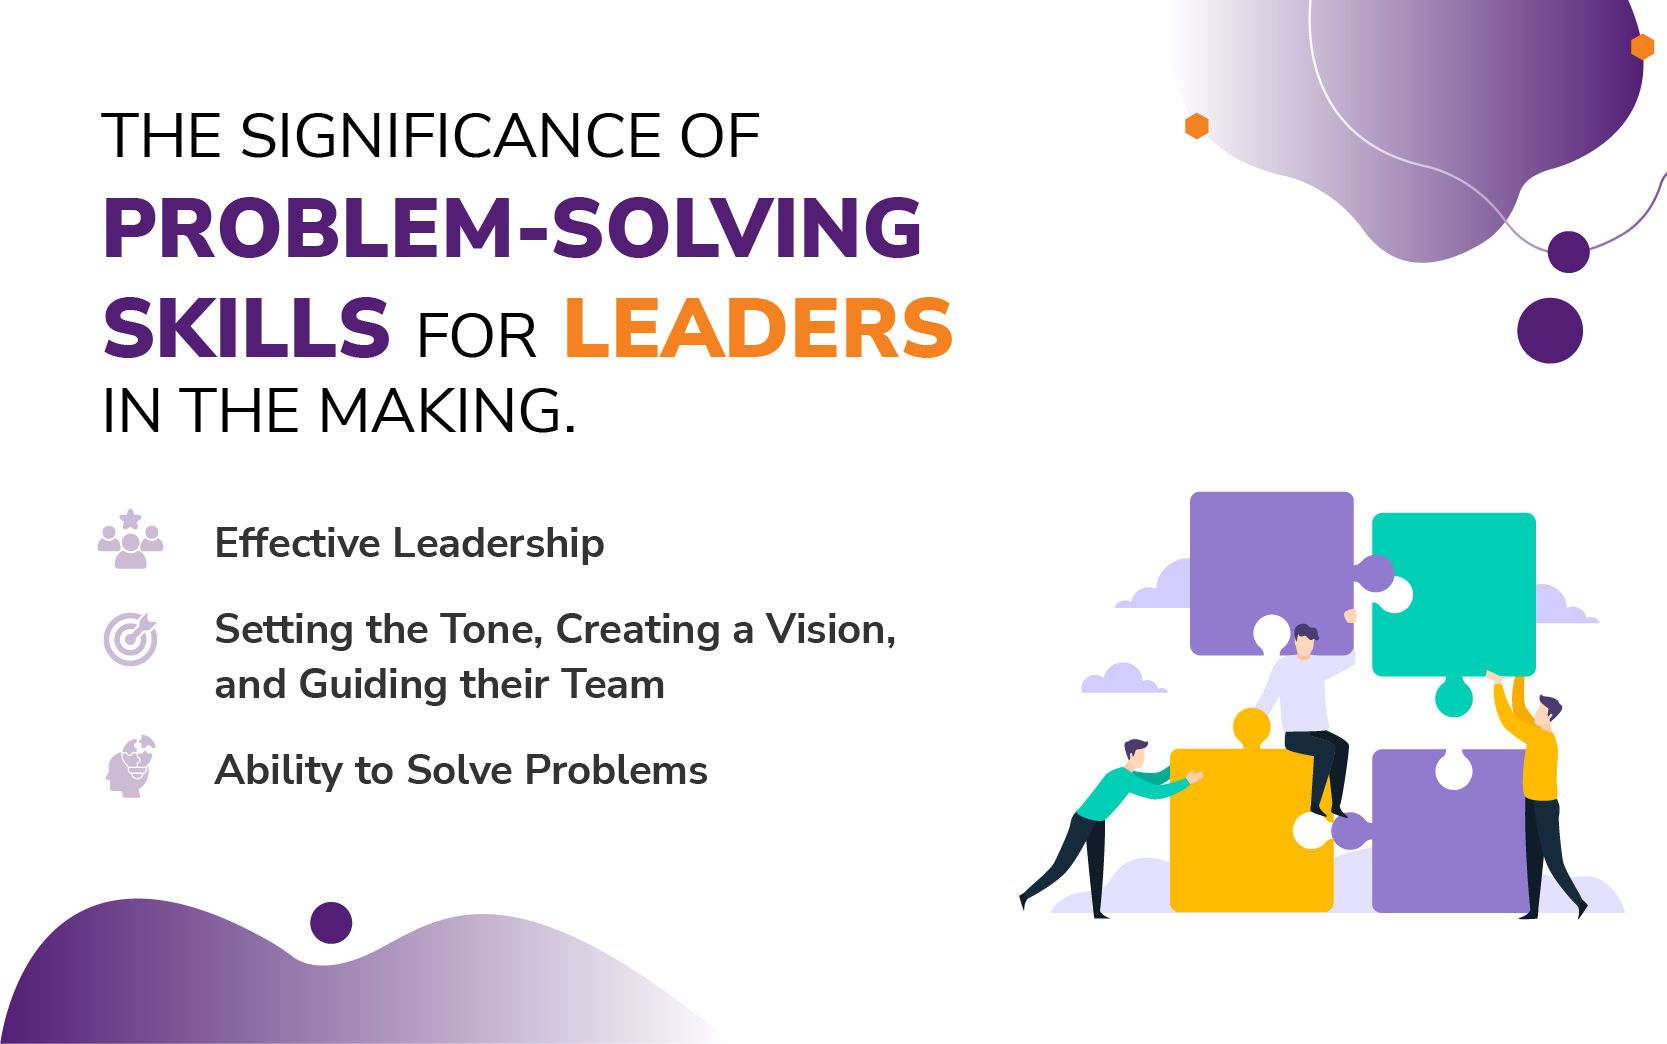 THE-SIGNIFICANCE-OF-PROBLEM-SOLVING-SKILLS-FOR-LEADERS-IN-THE-MAKING